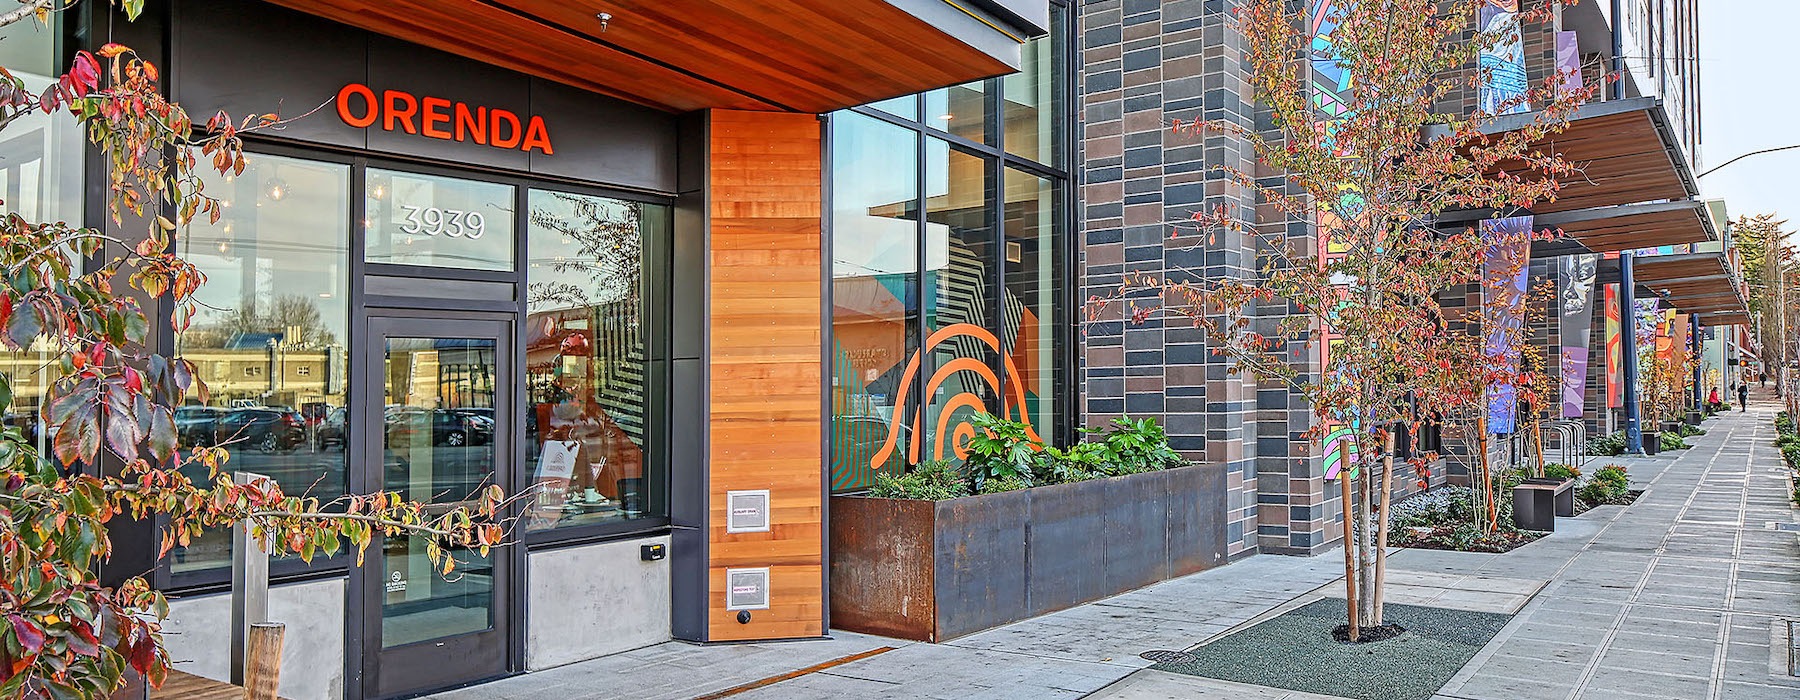 Exterior image of Orenda's welcoming entrance